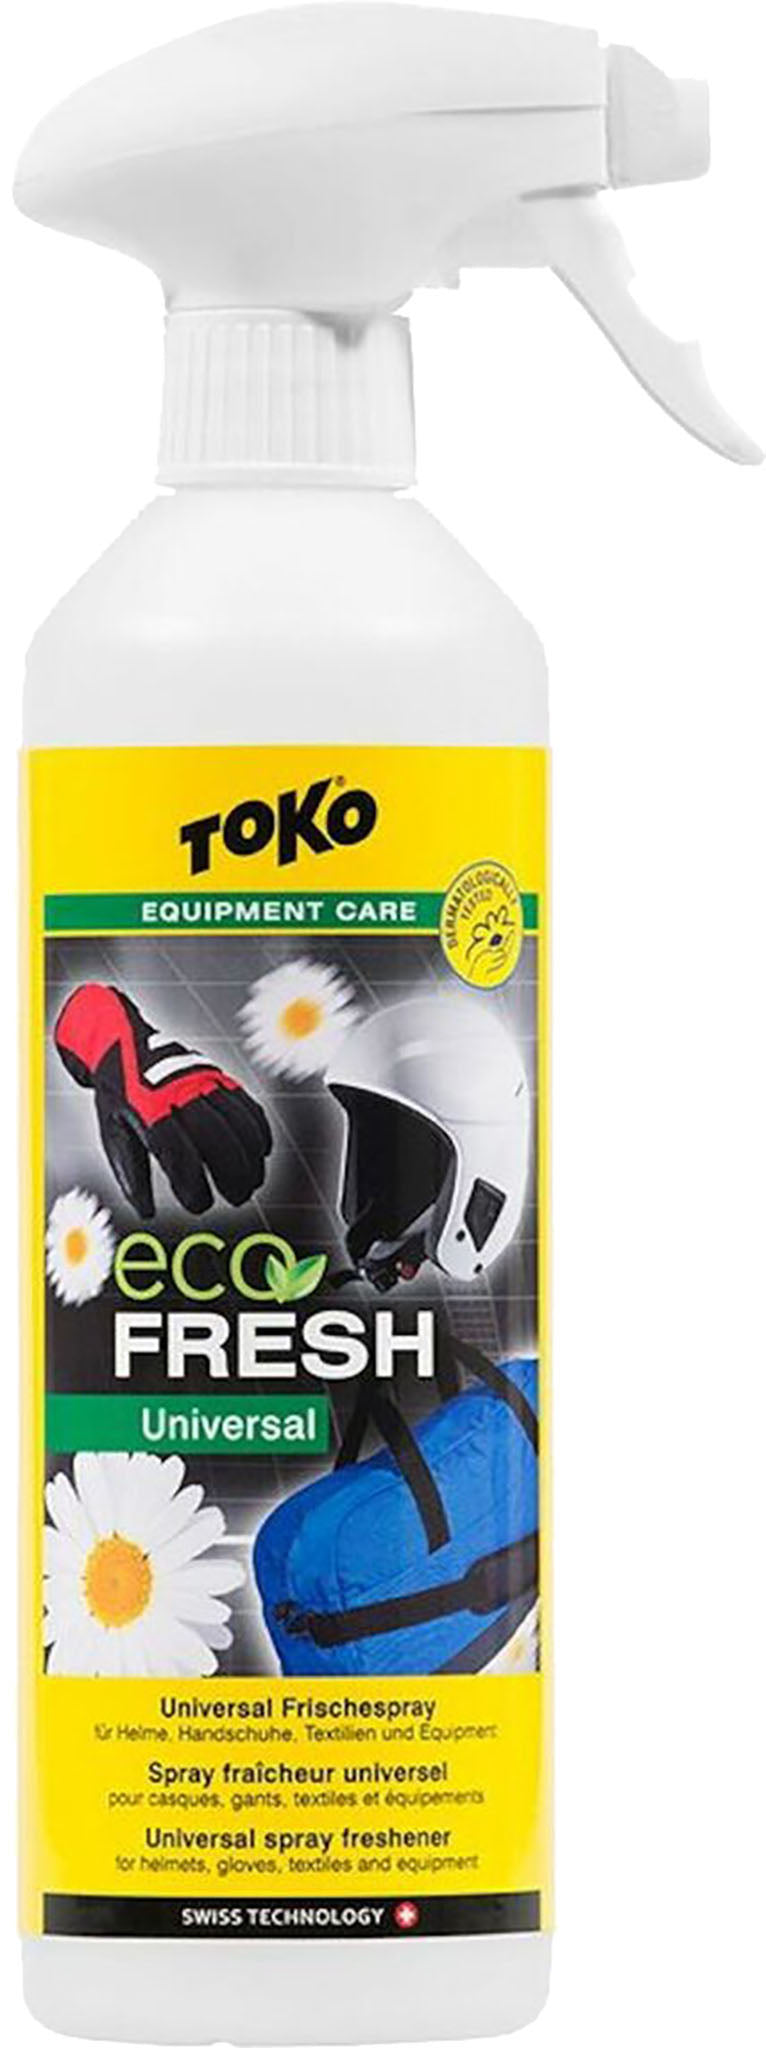 Buy TOKO Down Wash ECO, 250ml with free shipping 